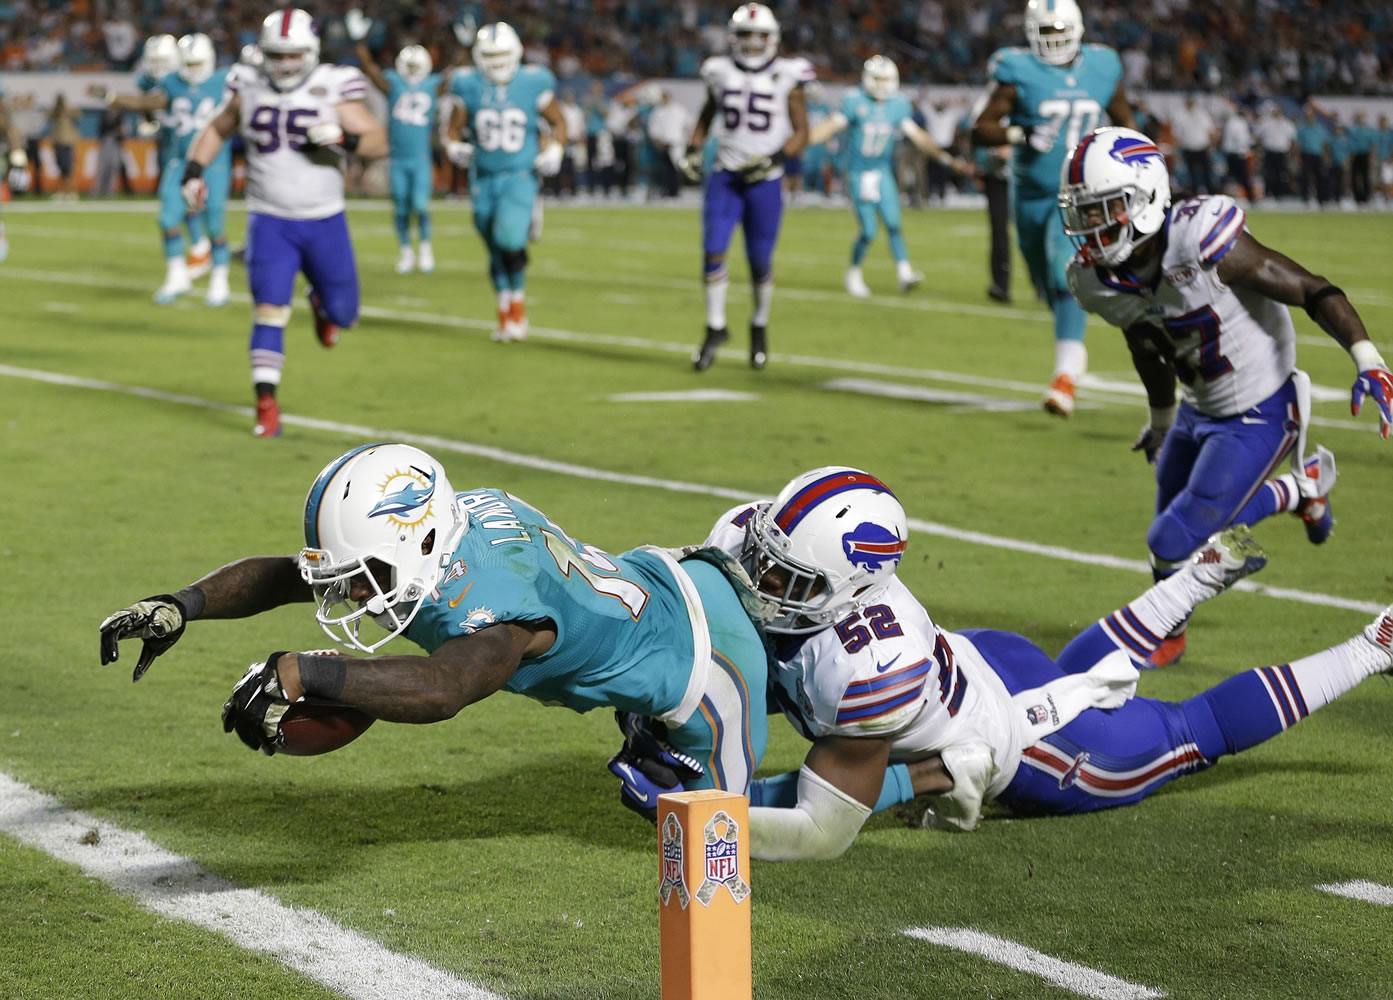 Miami Dolphins wide receiver Jarvis Landry (14) stretches out for a touchdown as he is tackled by Buffalo Bills inside linebacker Preston Brown (52) during the fourth quarter, Thursday, Nov. 13, 2014 in Miami Gardens, Fla.